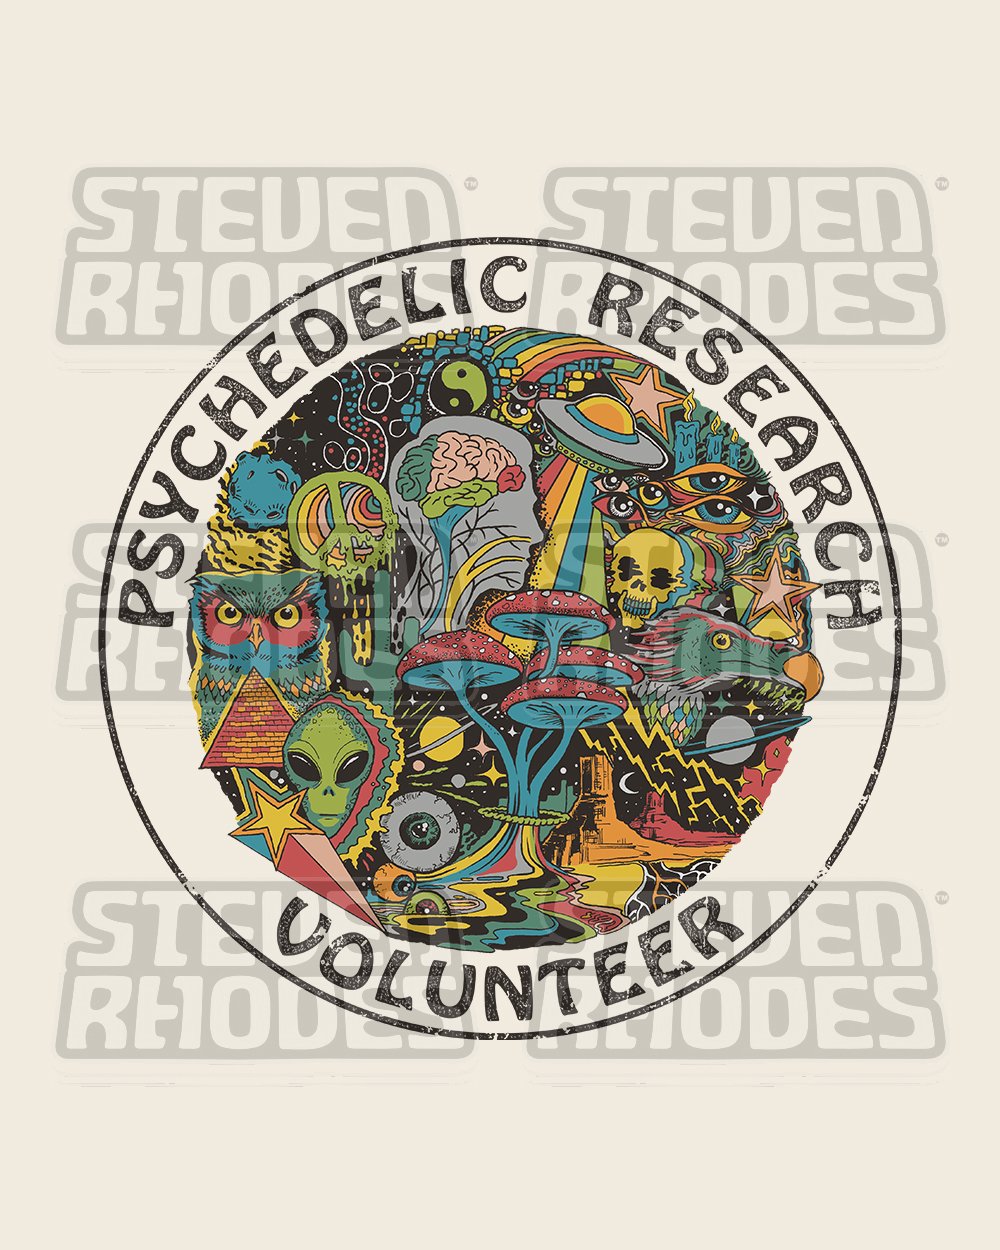 Psychedelic Research Volunteer T-Shirt Australia Online #colour_natural